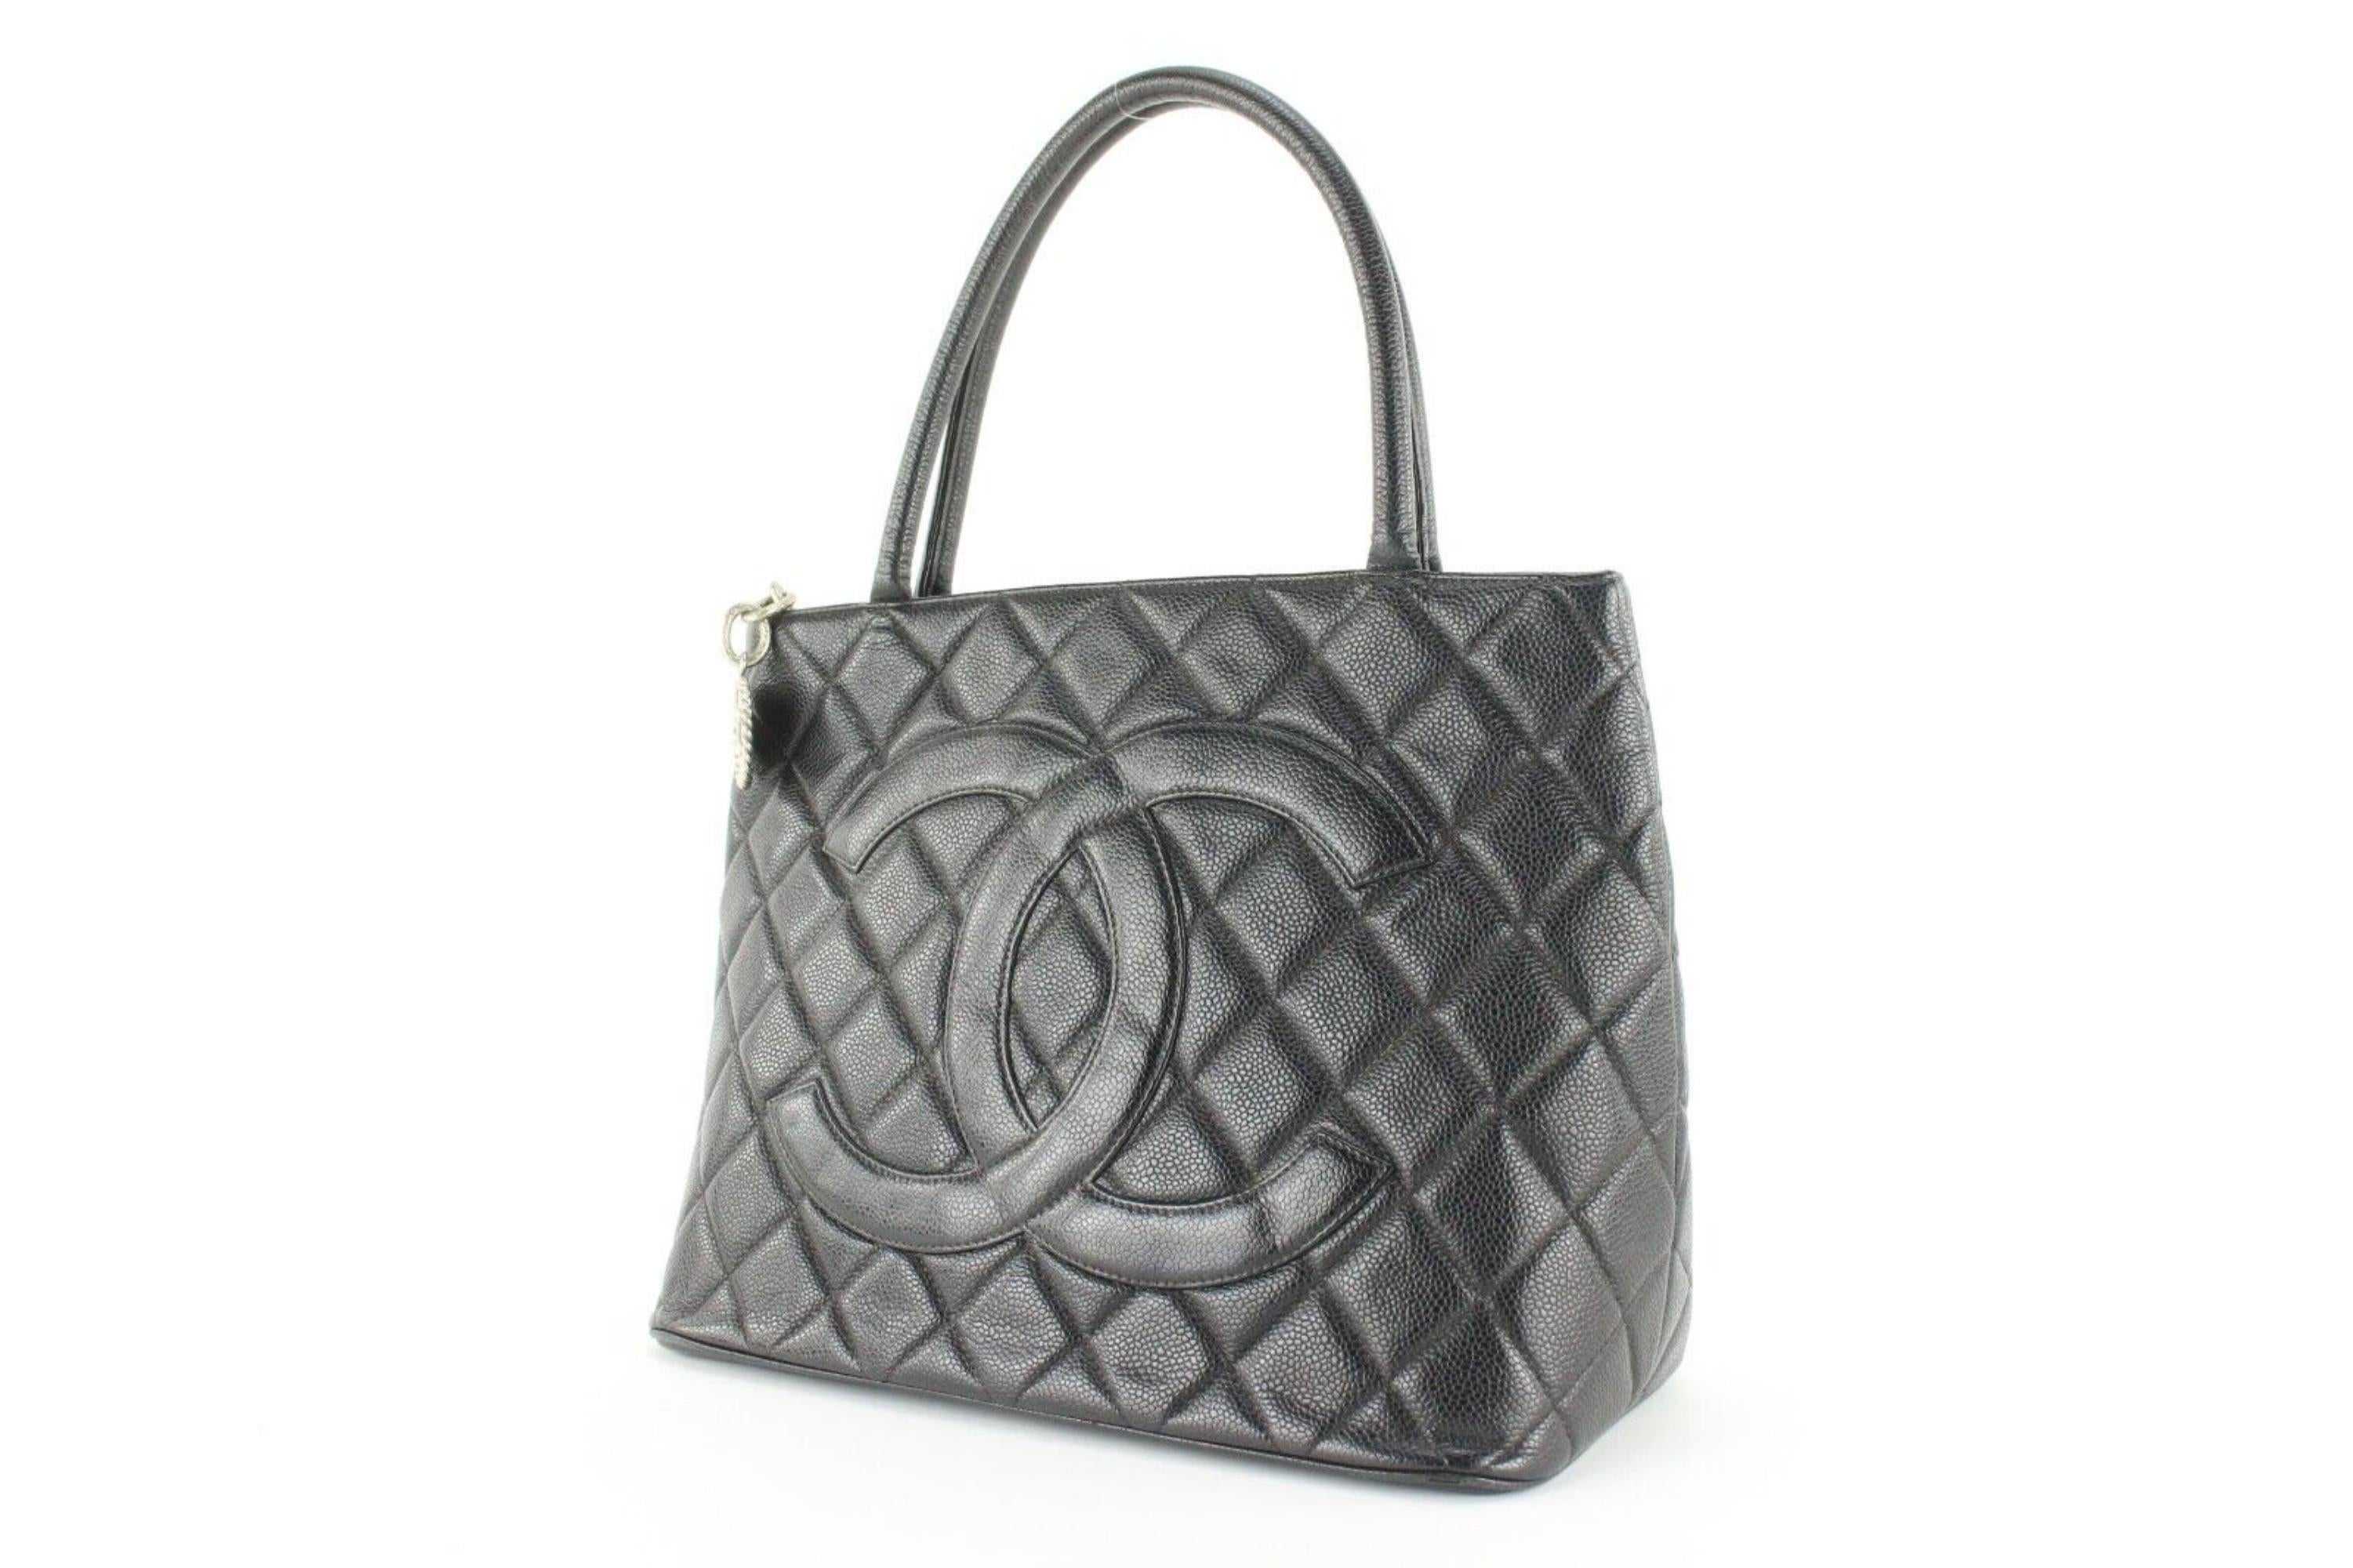 Chanel Black Quilted Caviar Leather Medallion Zip Tote SHW 1CC1101 For Sale 4